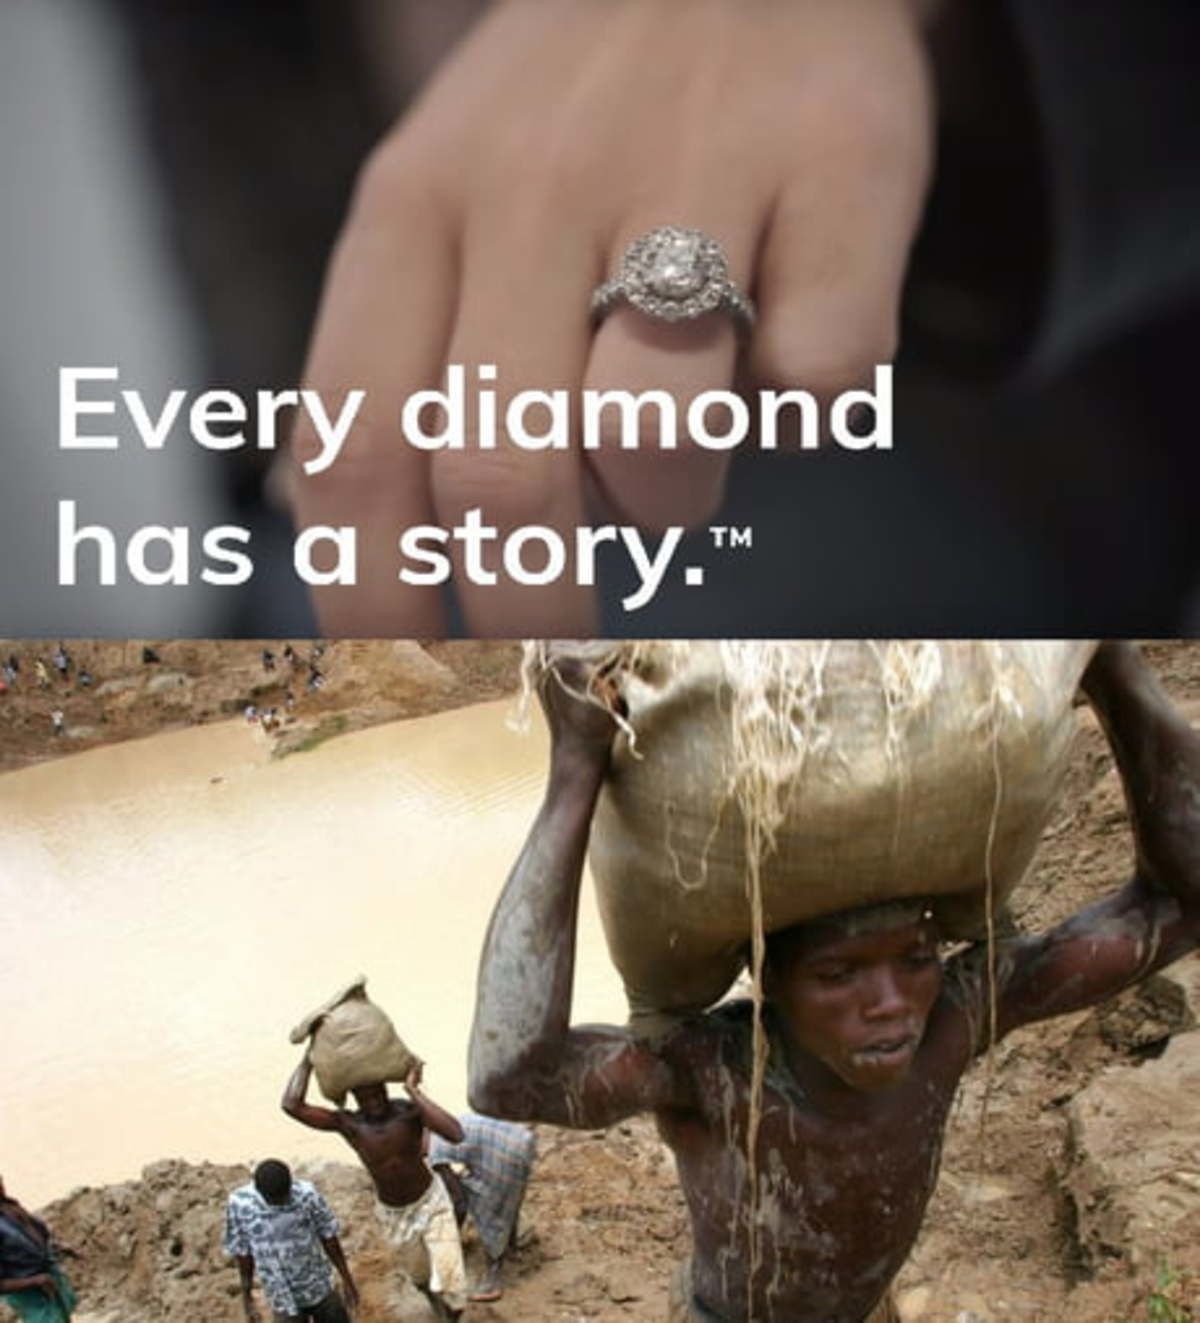 slaving away on diamonds just to end up in my peehole lmaooo